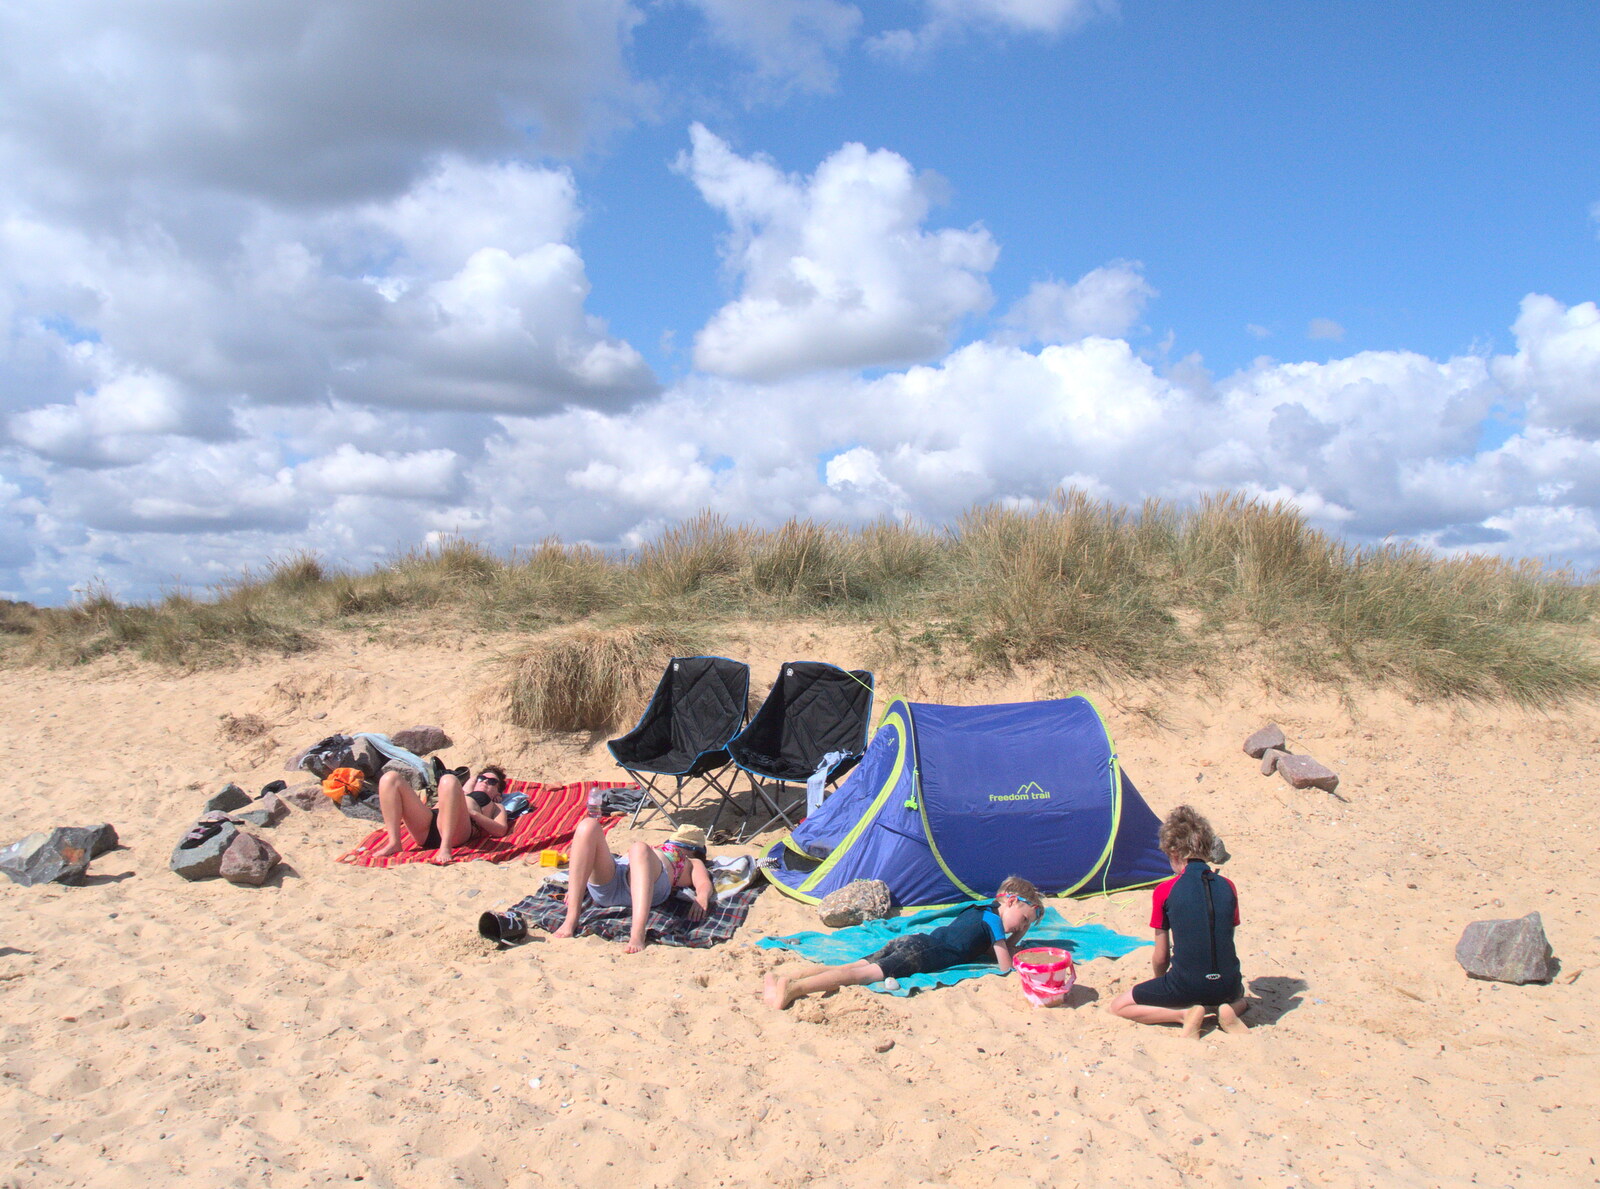 Our beach encampment from A Day on the Beach, Southwold, Suffolk - 25th August 2018